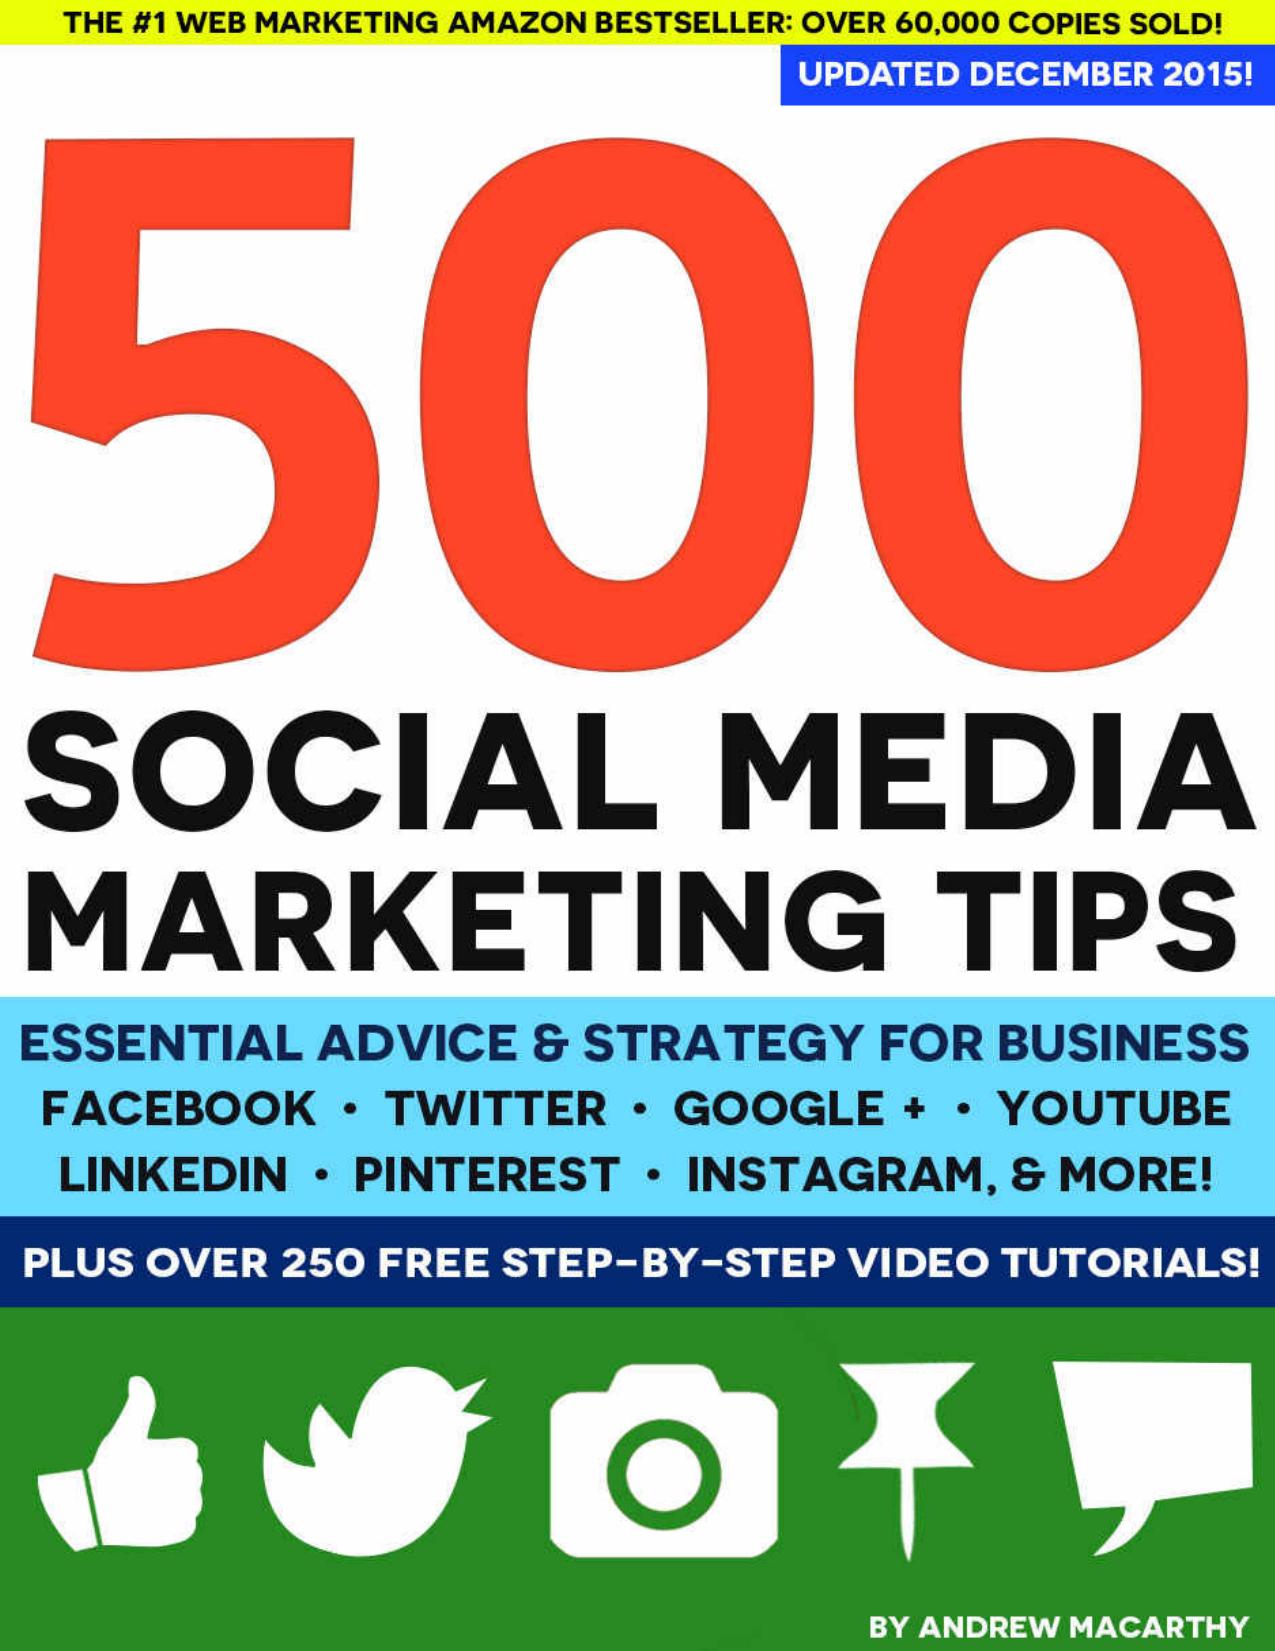 500 Social Media Marketing Tips: Essential Advice, Hints and Strategy for Business: Facebook, Twitter, Pinterest, Google+, YouTube, Instagram, LinkedIn, and More! by Andrew Macarthy